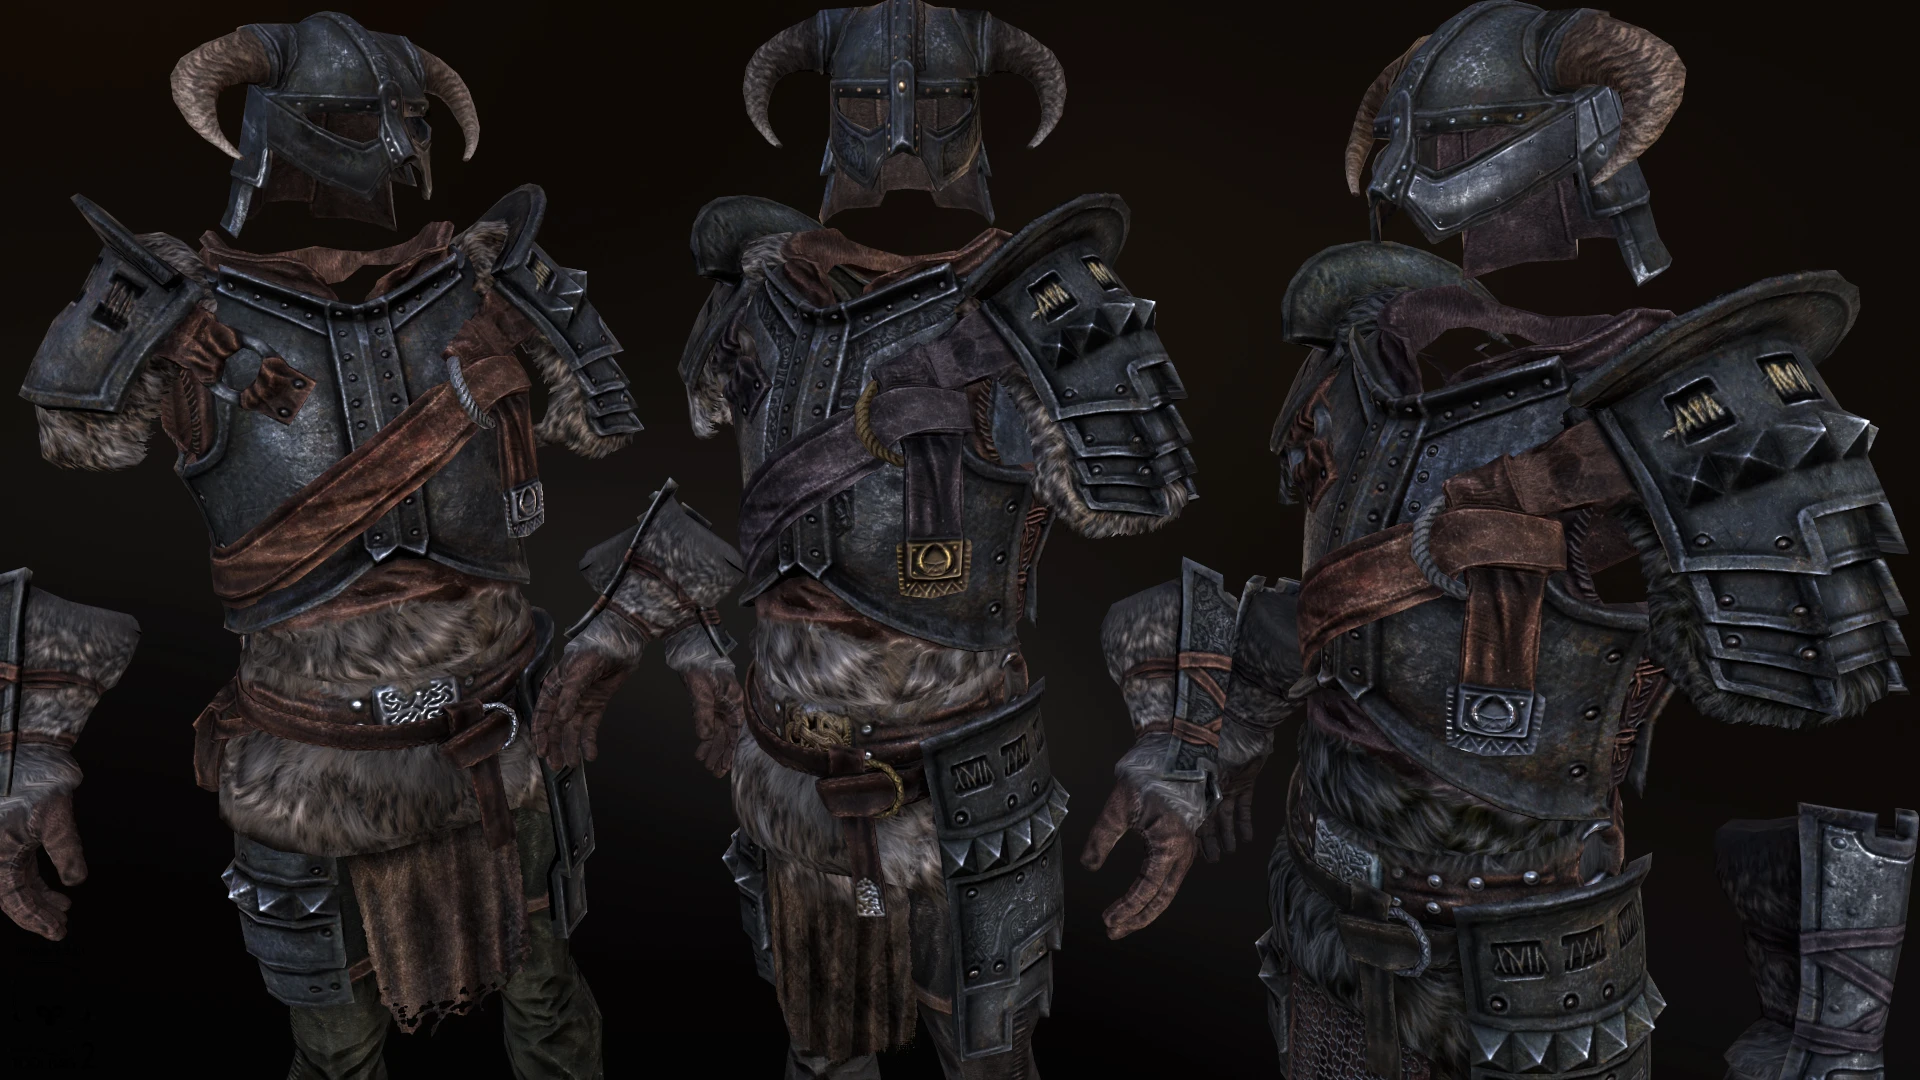 Amidianborn Iron And Banded Armor At Skyrim Nexus Mods And Community.